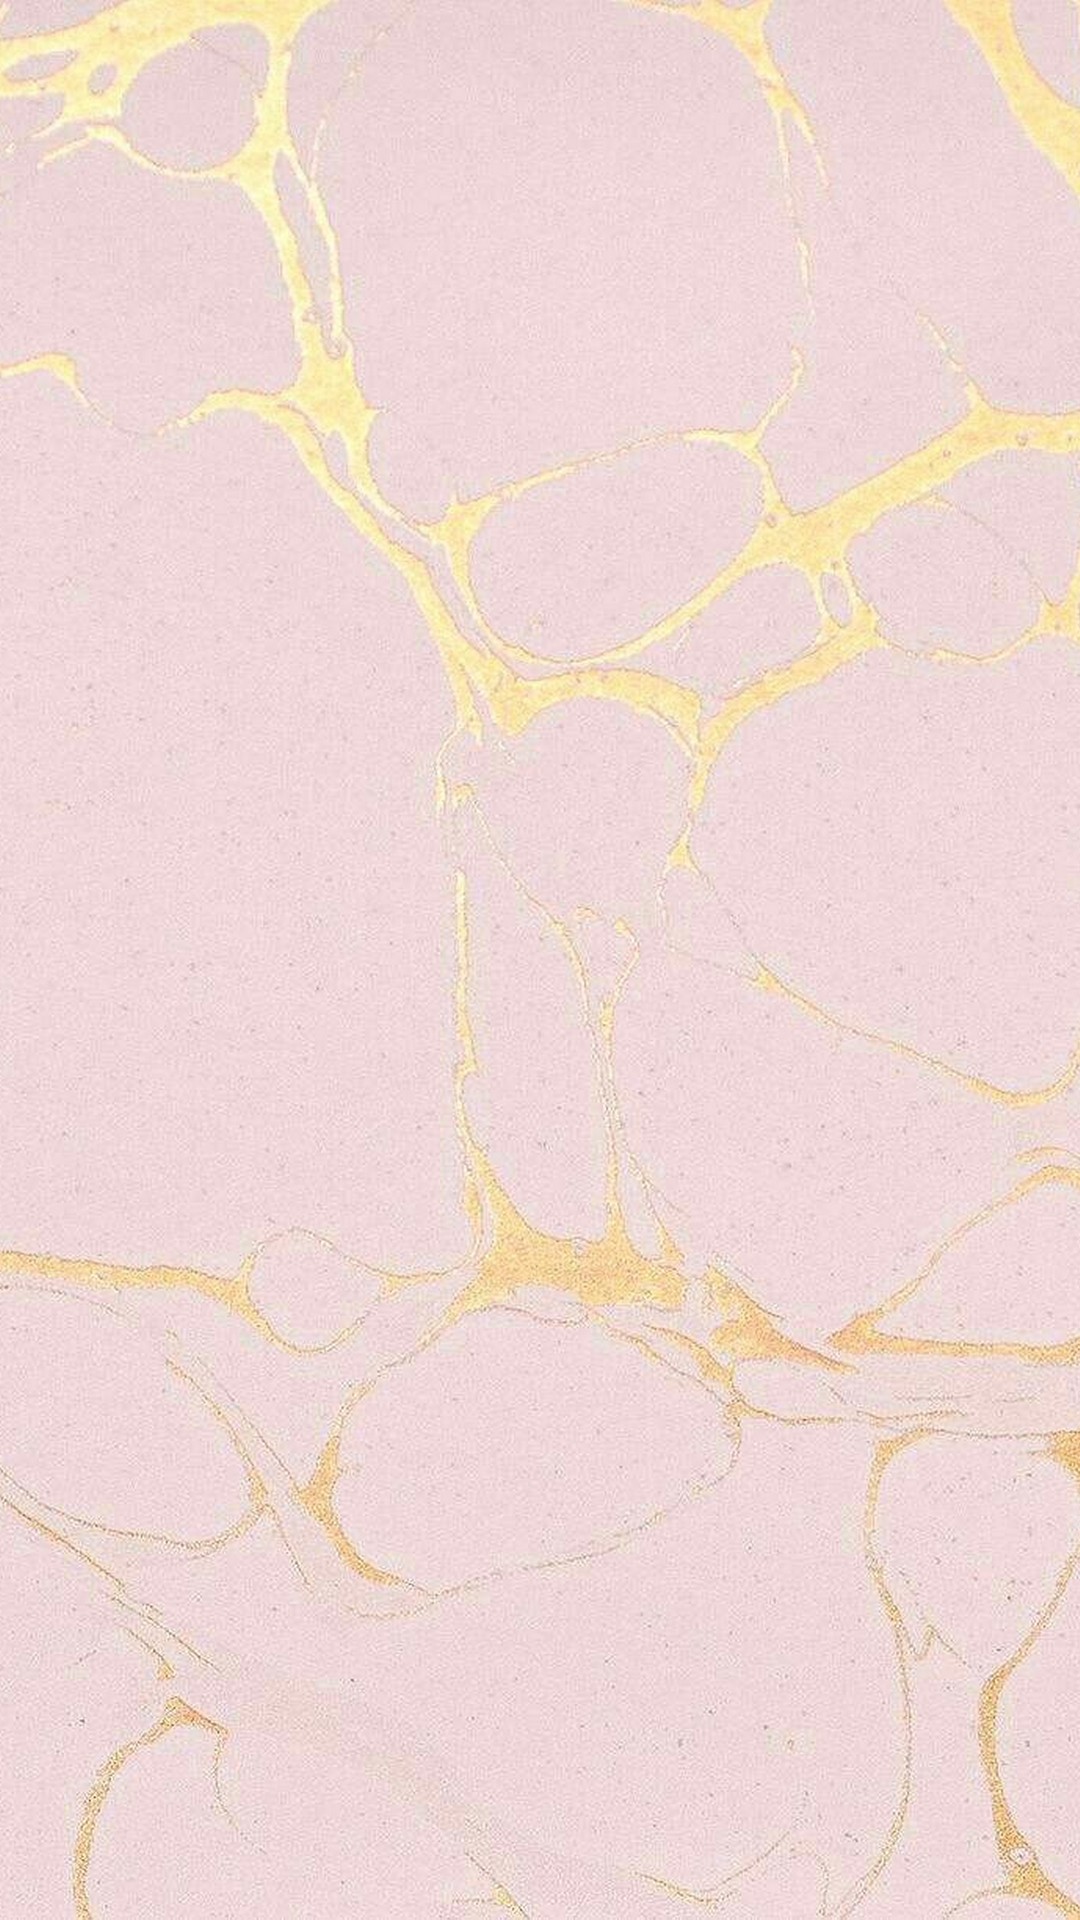 Rose Gold Marble Wallpaper For iPhone resolution 1080x1920